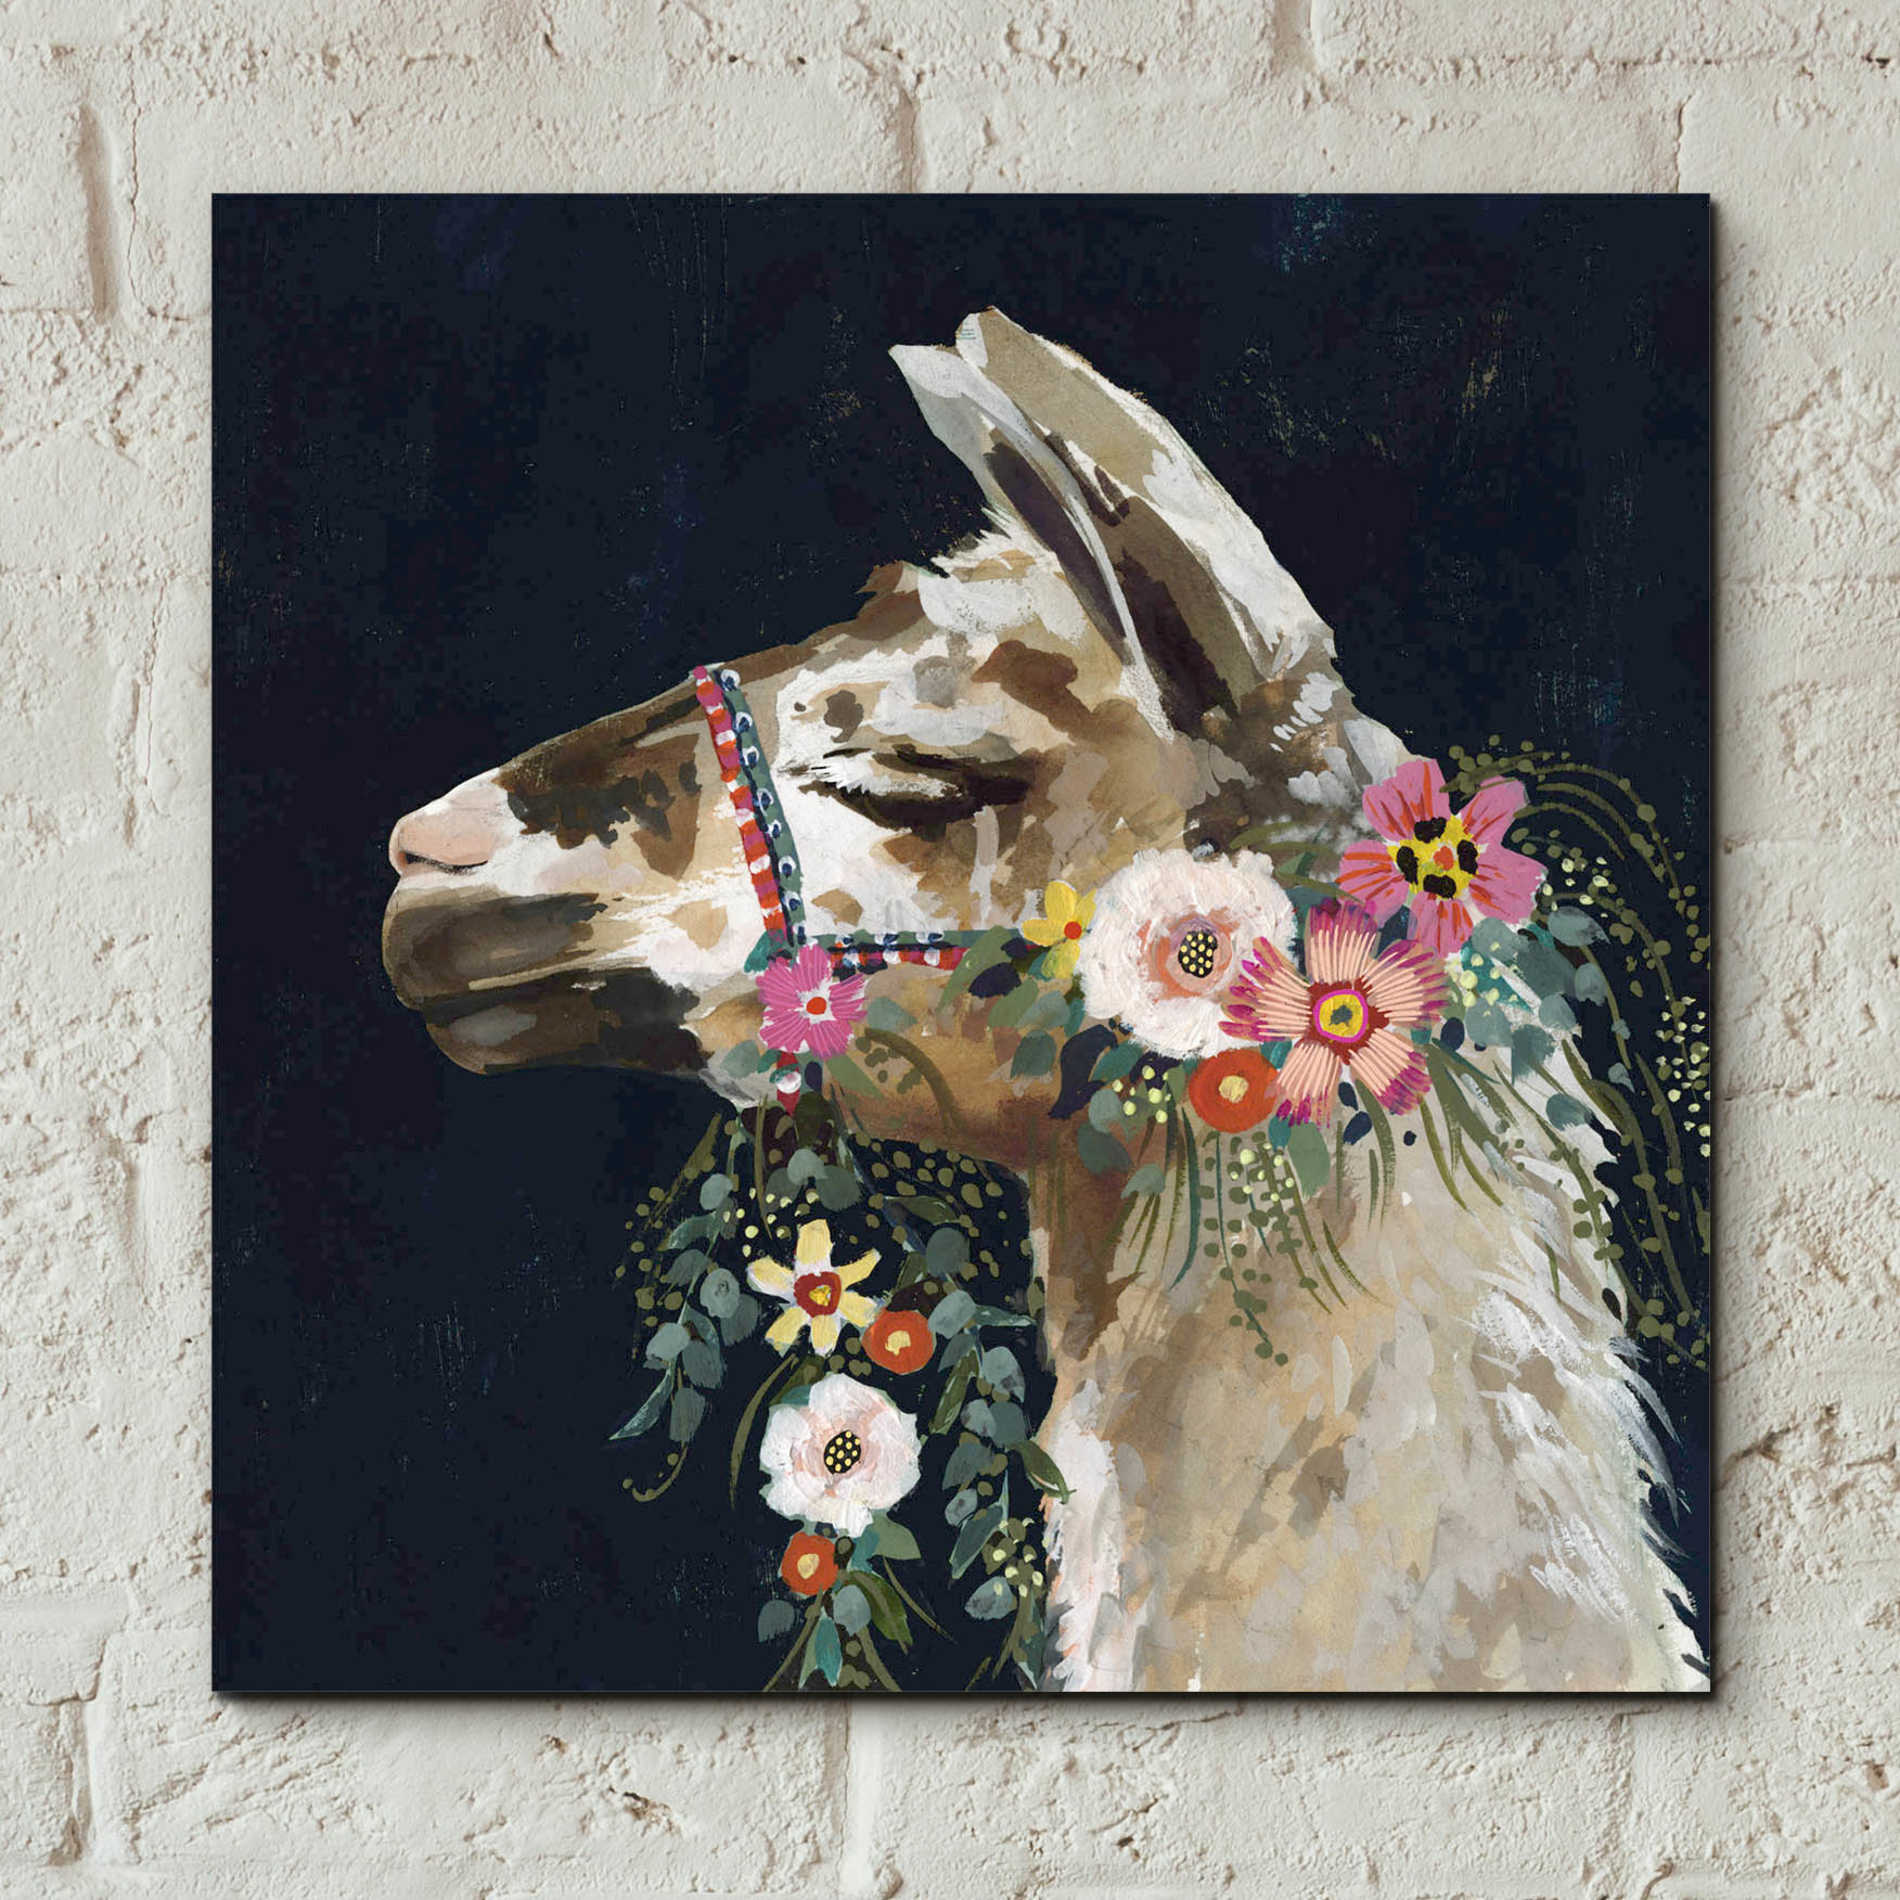 Epic Art 'Lovely Llama II' by Victoria Borges, Acrylic Glass Wall Art,12x12